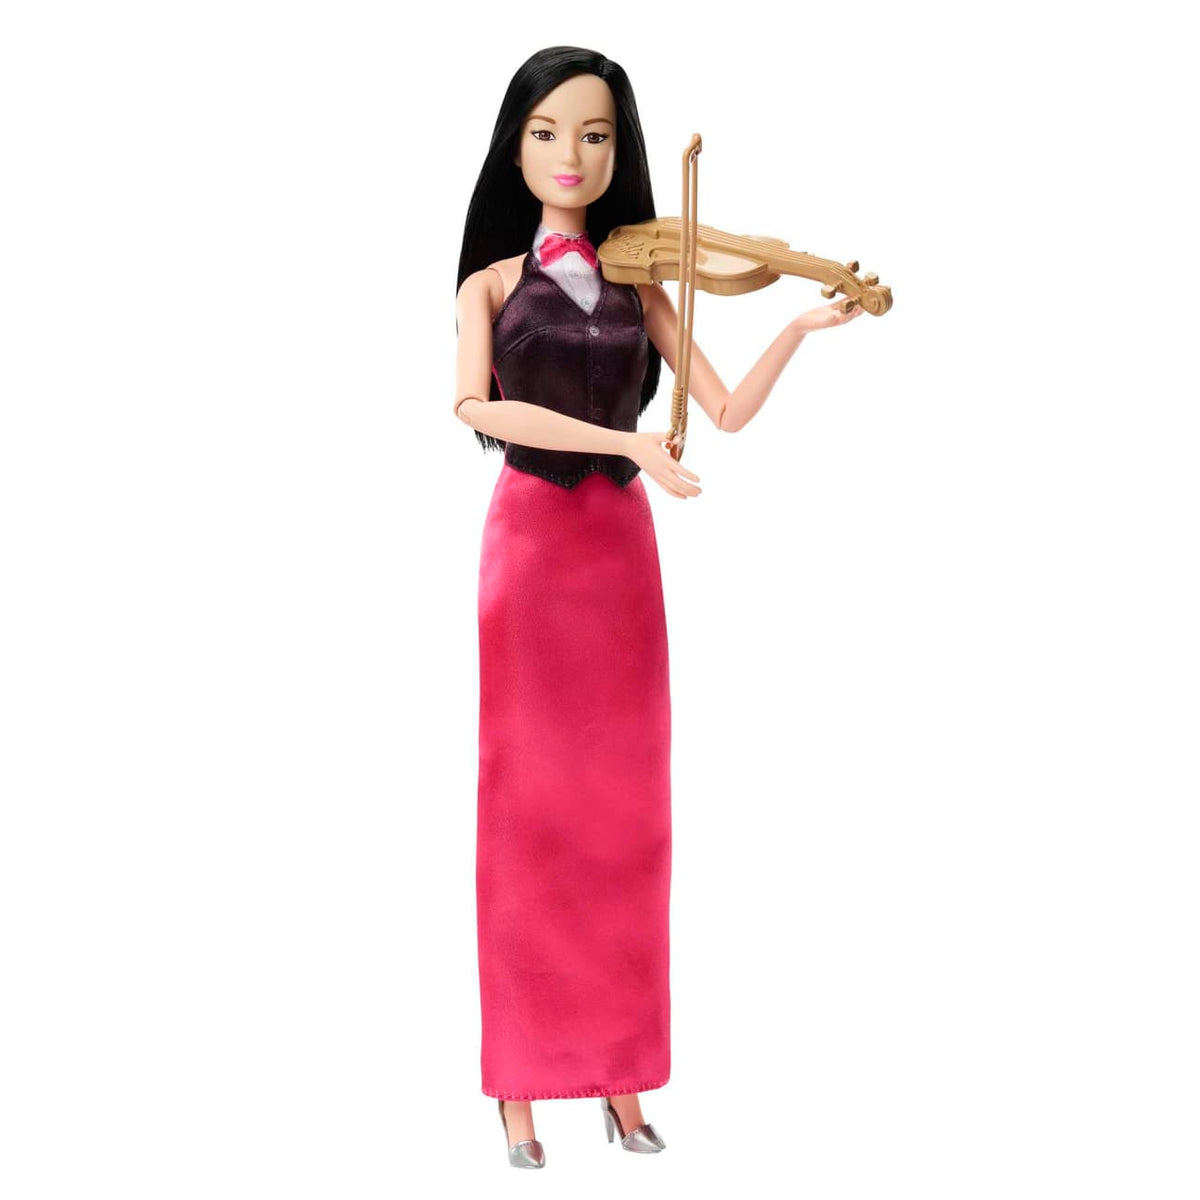 Barbie Doll &amp; Accessories, Career Violinist Musician Doll by Mattel -Mattel - India - www.superherotoystore.com